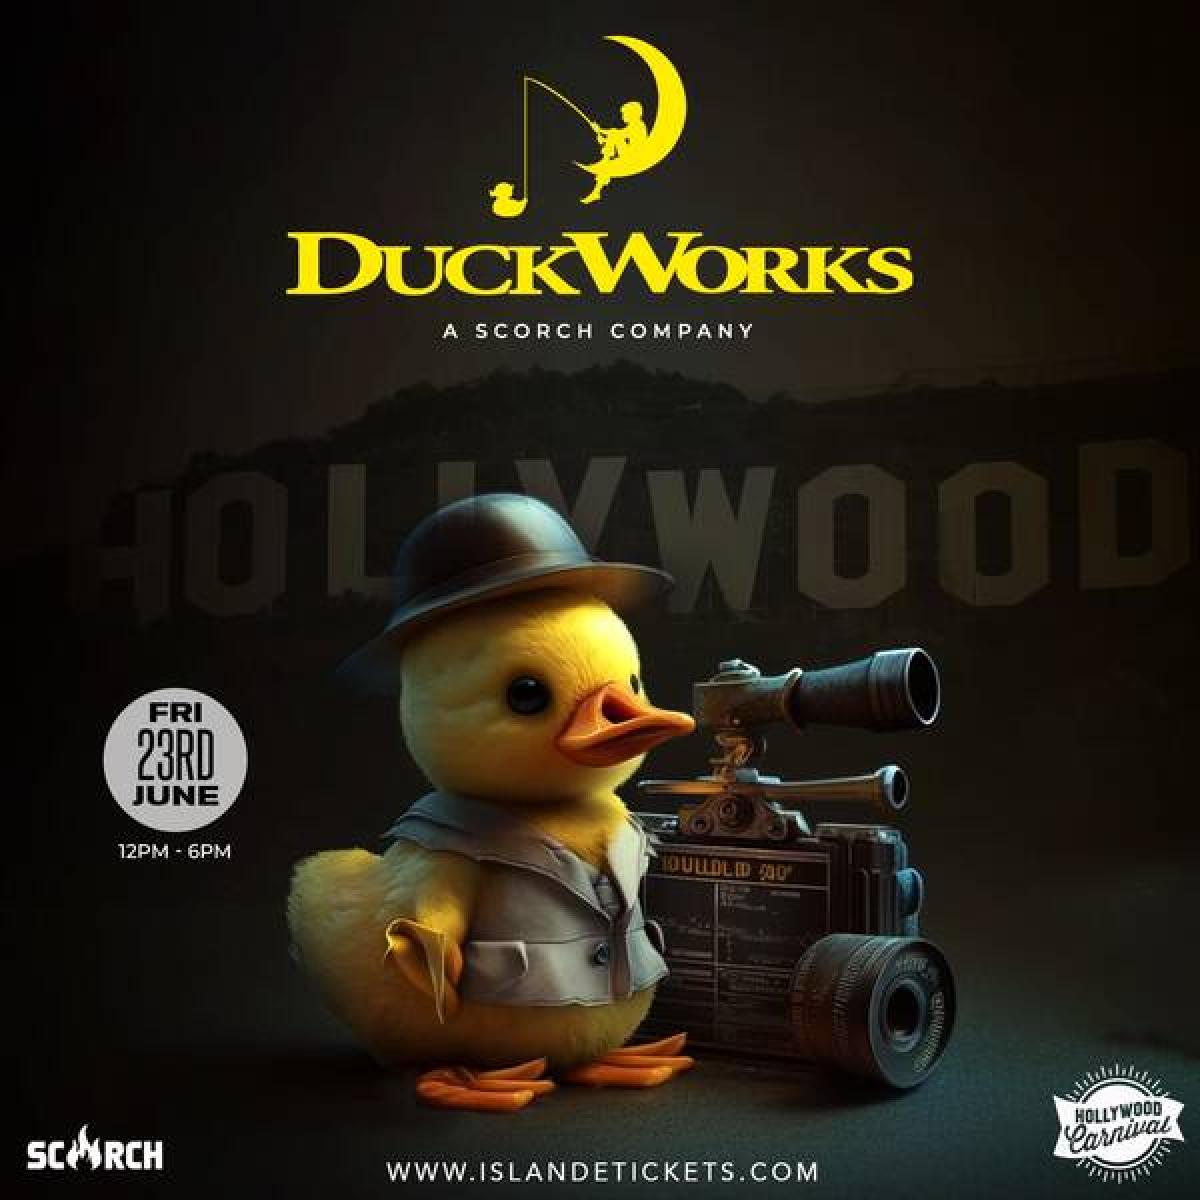 _uck Work Hollywood flyer or graphic.